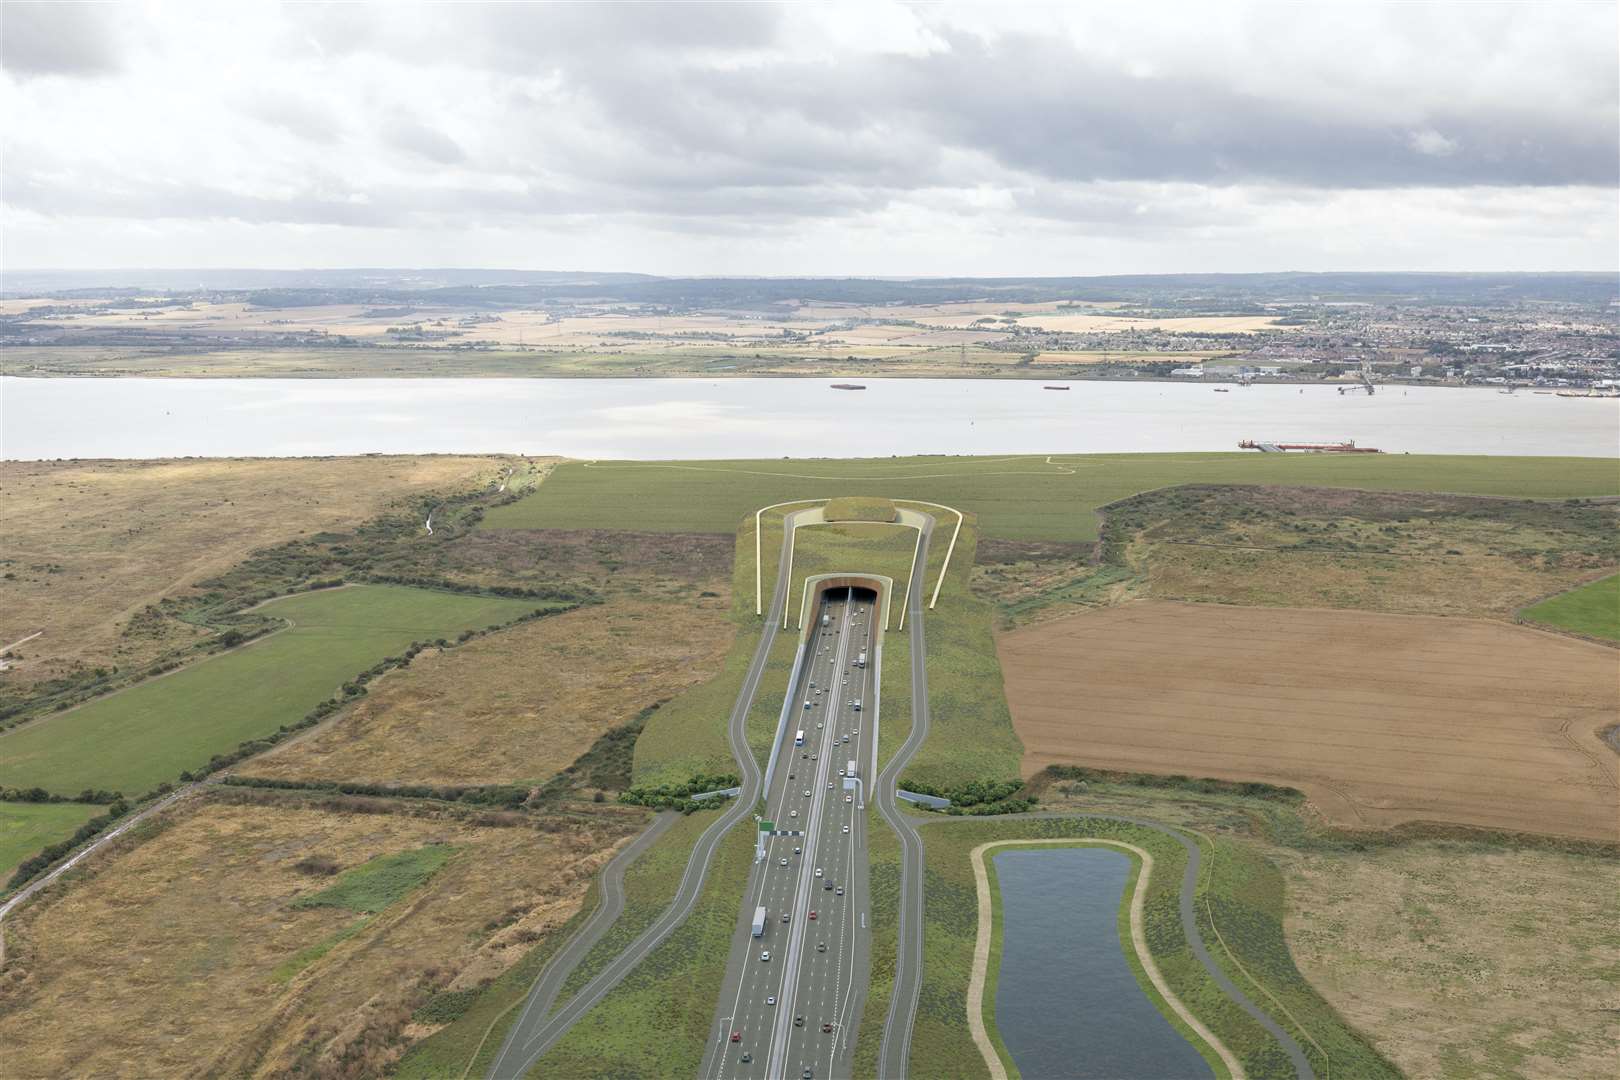 The latest proposals for the northern entrance of the tunnel looking across the river towards Kent of the Lower Thames Crossing. Picture: Highways England/Joas Souza Photographer